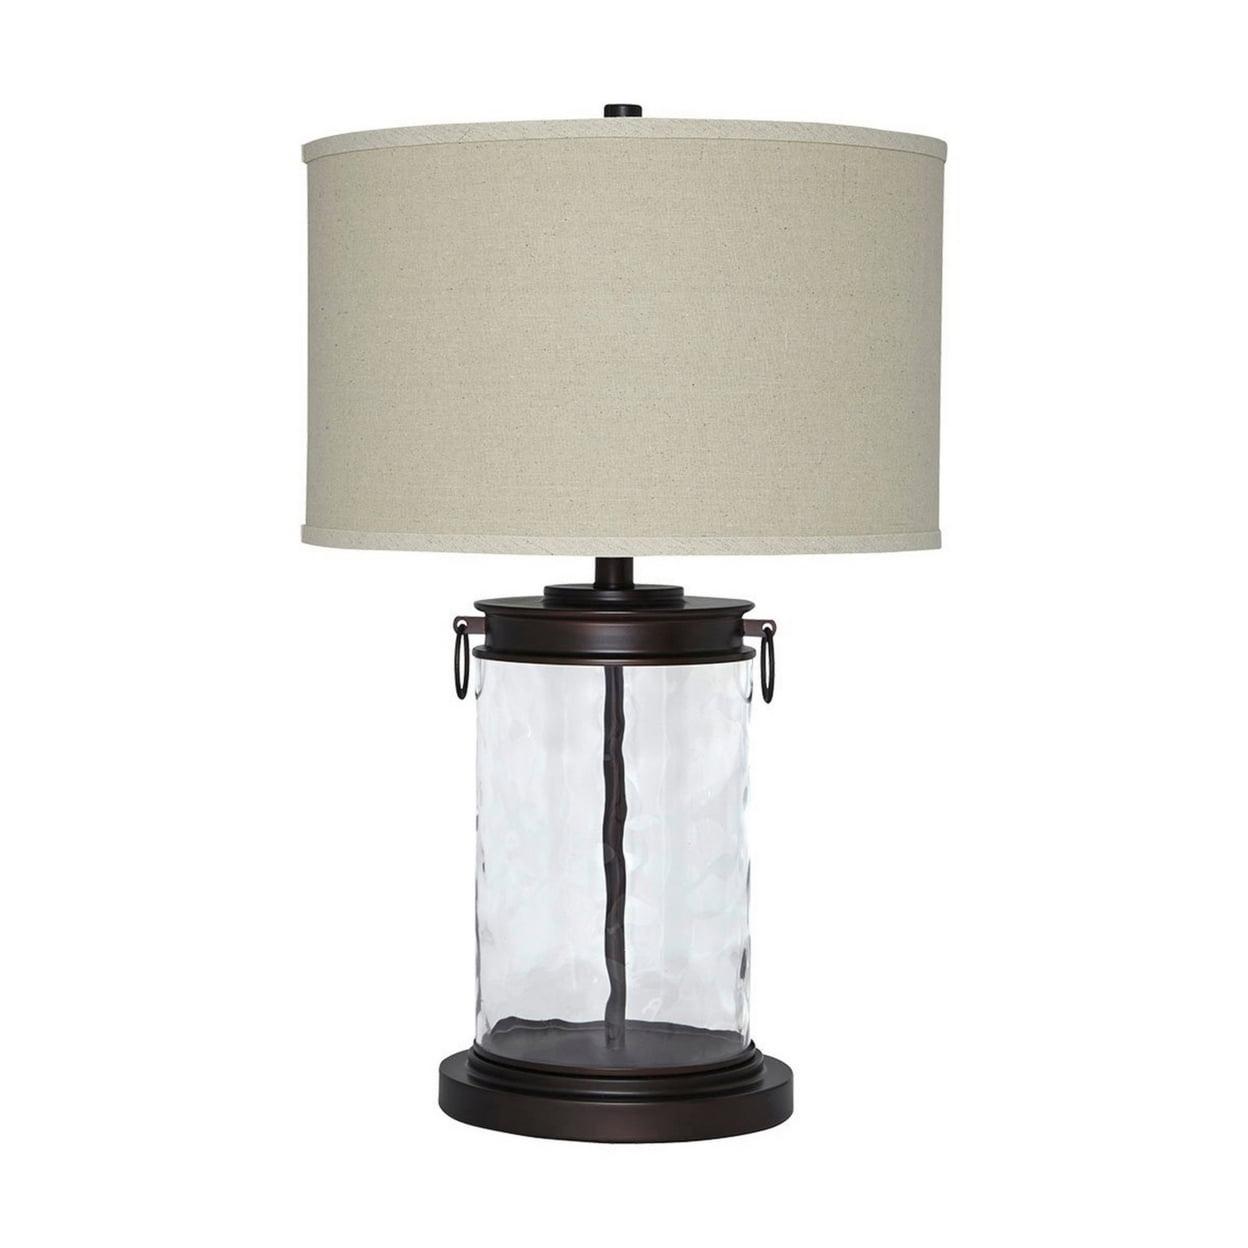 Transitional Bronze Table Lamp with Drum Shade and Glass Base